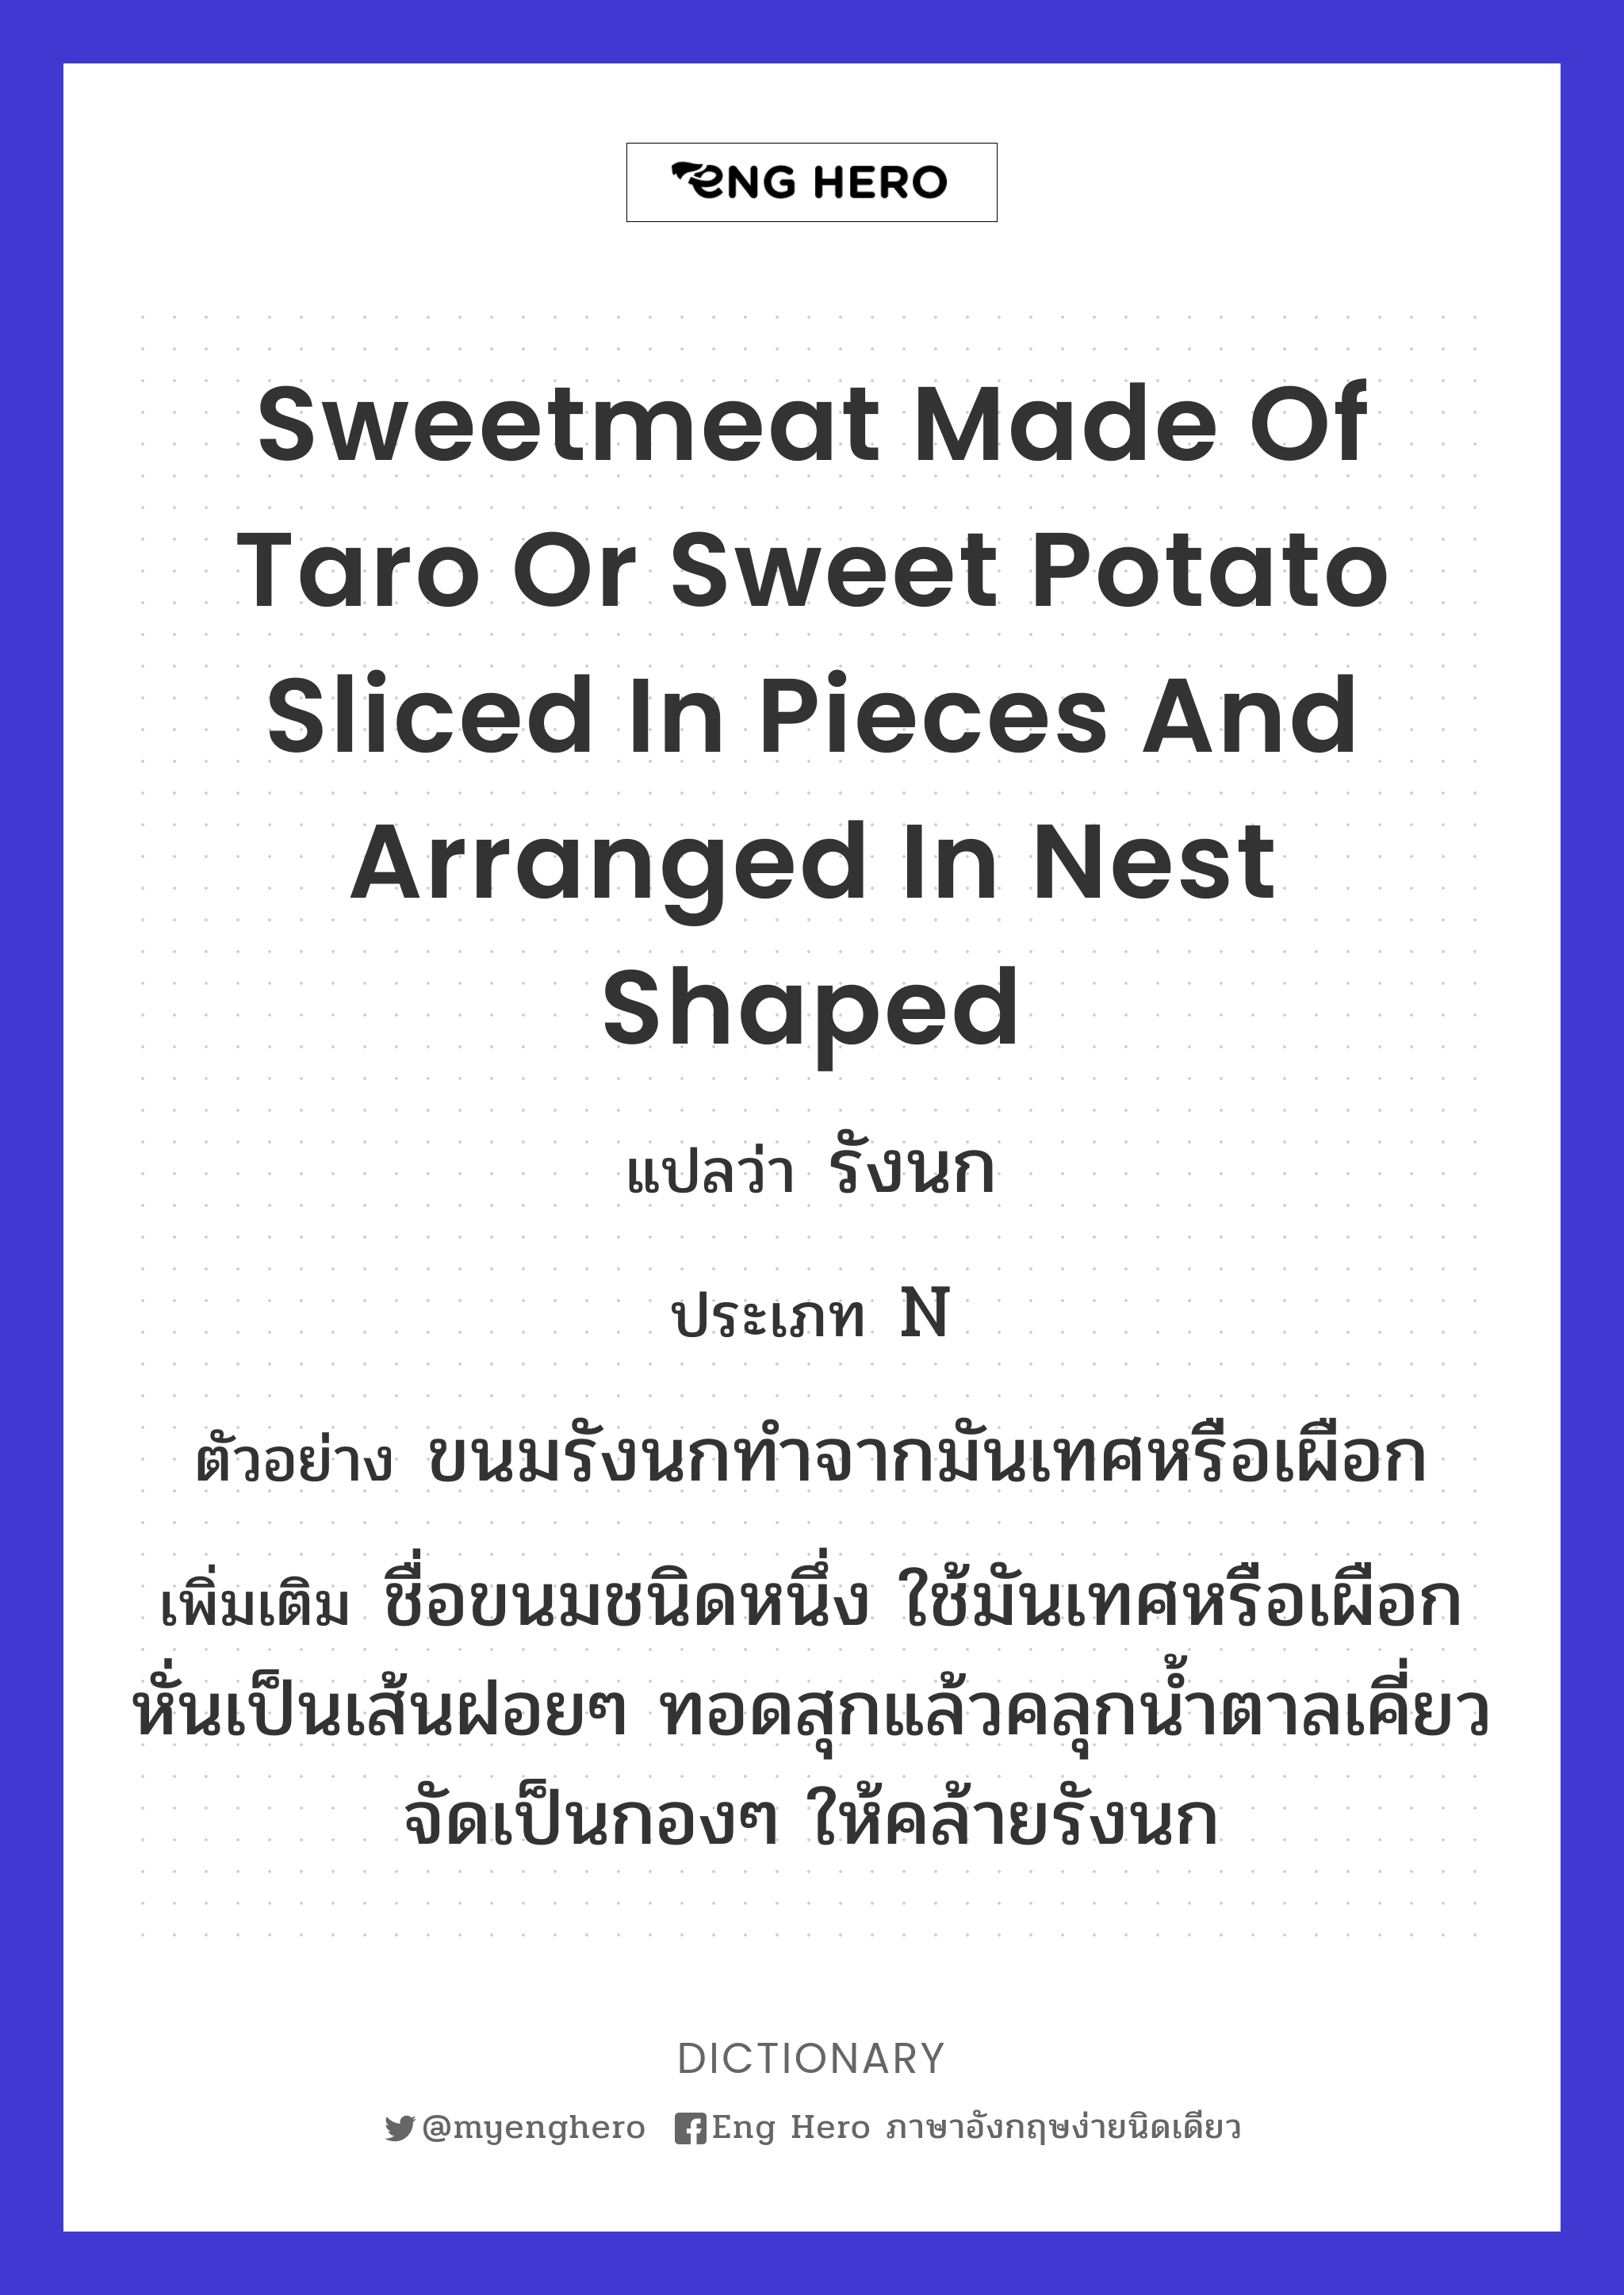 sweetmeat made of taro or sweet potato sliced in pieces and arranged in nest shaped